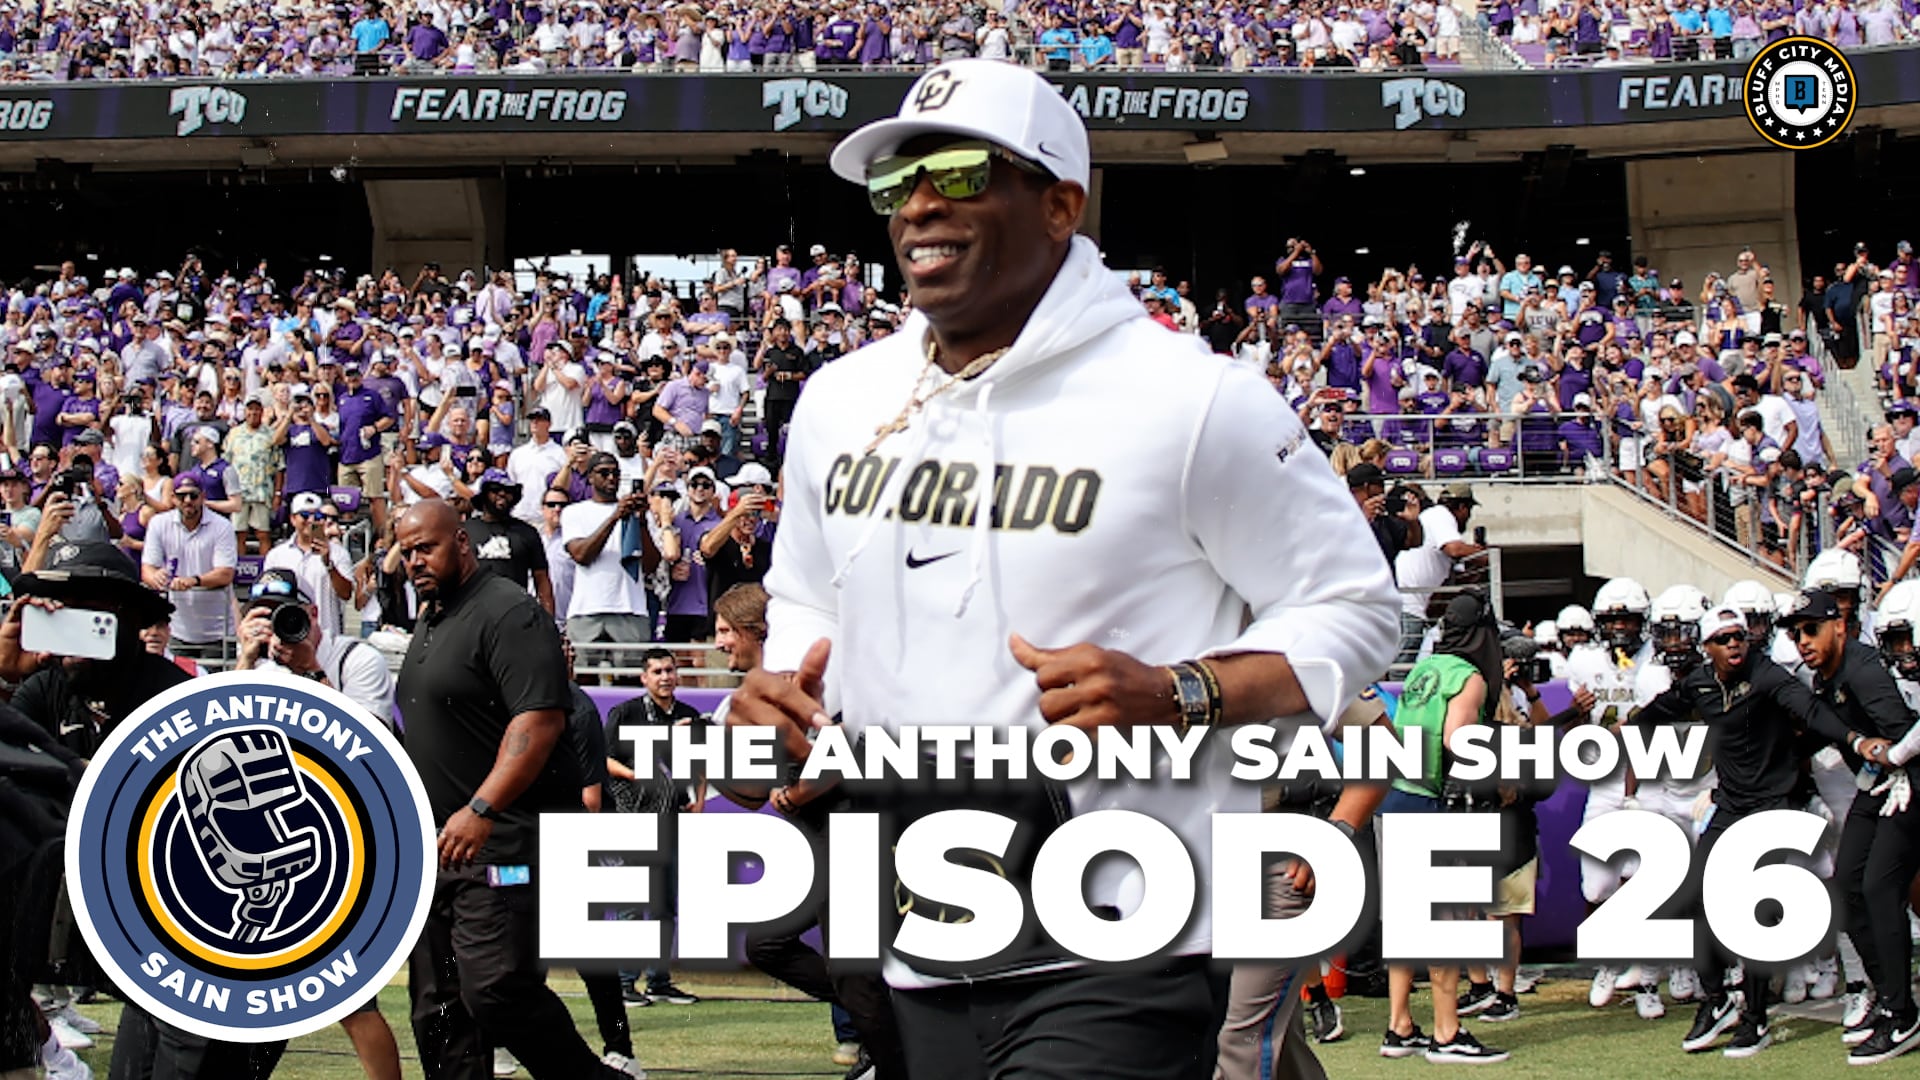 Featured image for “The Anthony Sain Show Ep 26: Coach Prime, FIBA World Cup, Mikey Williams Update”